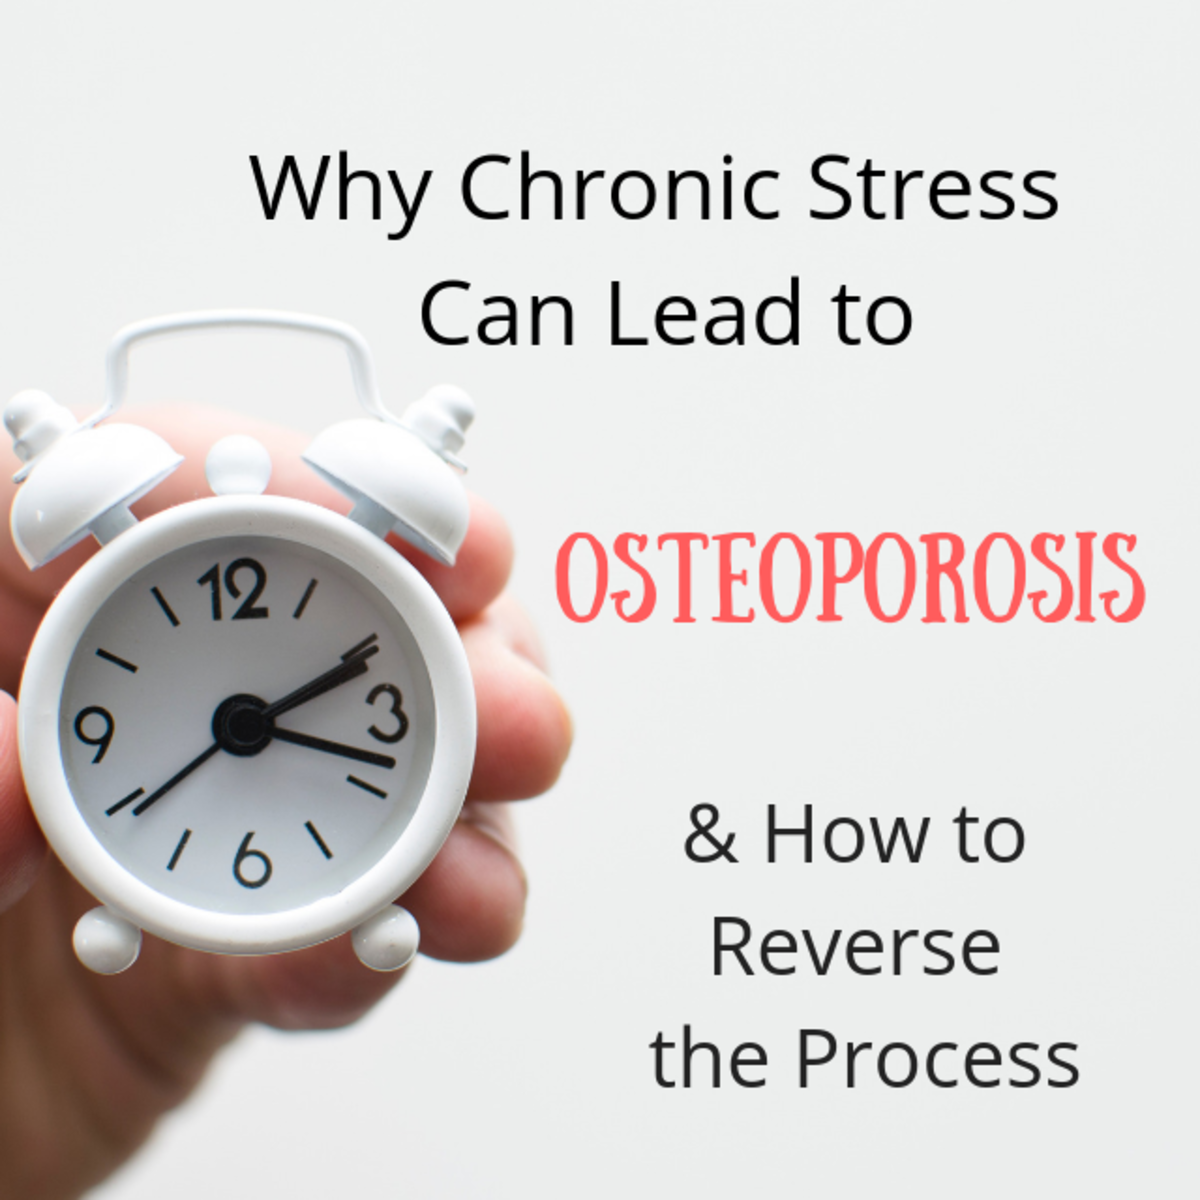 Chronic stress can lead to osteoporosis. Here's why.